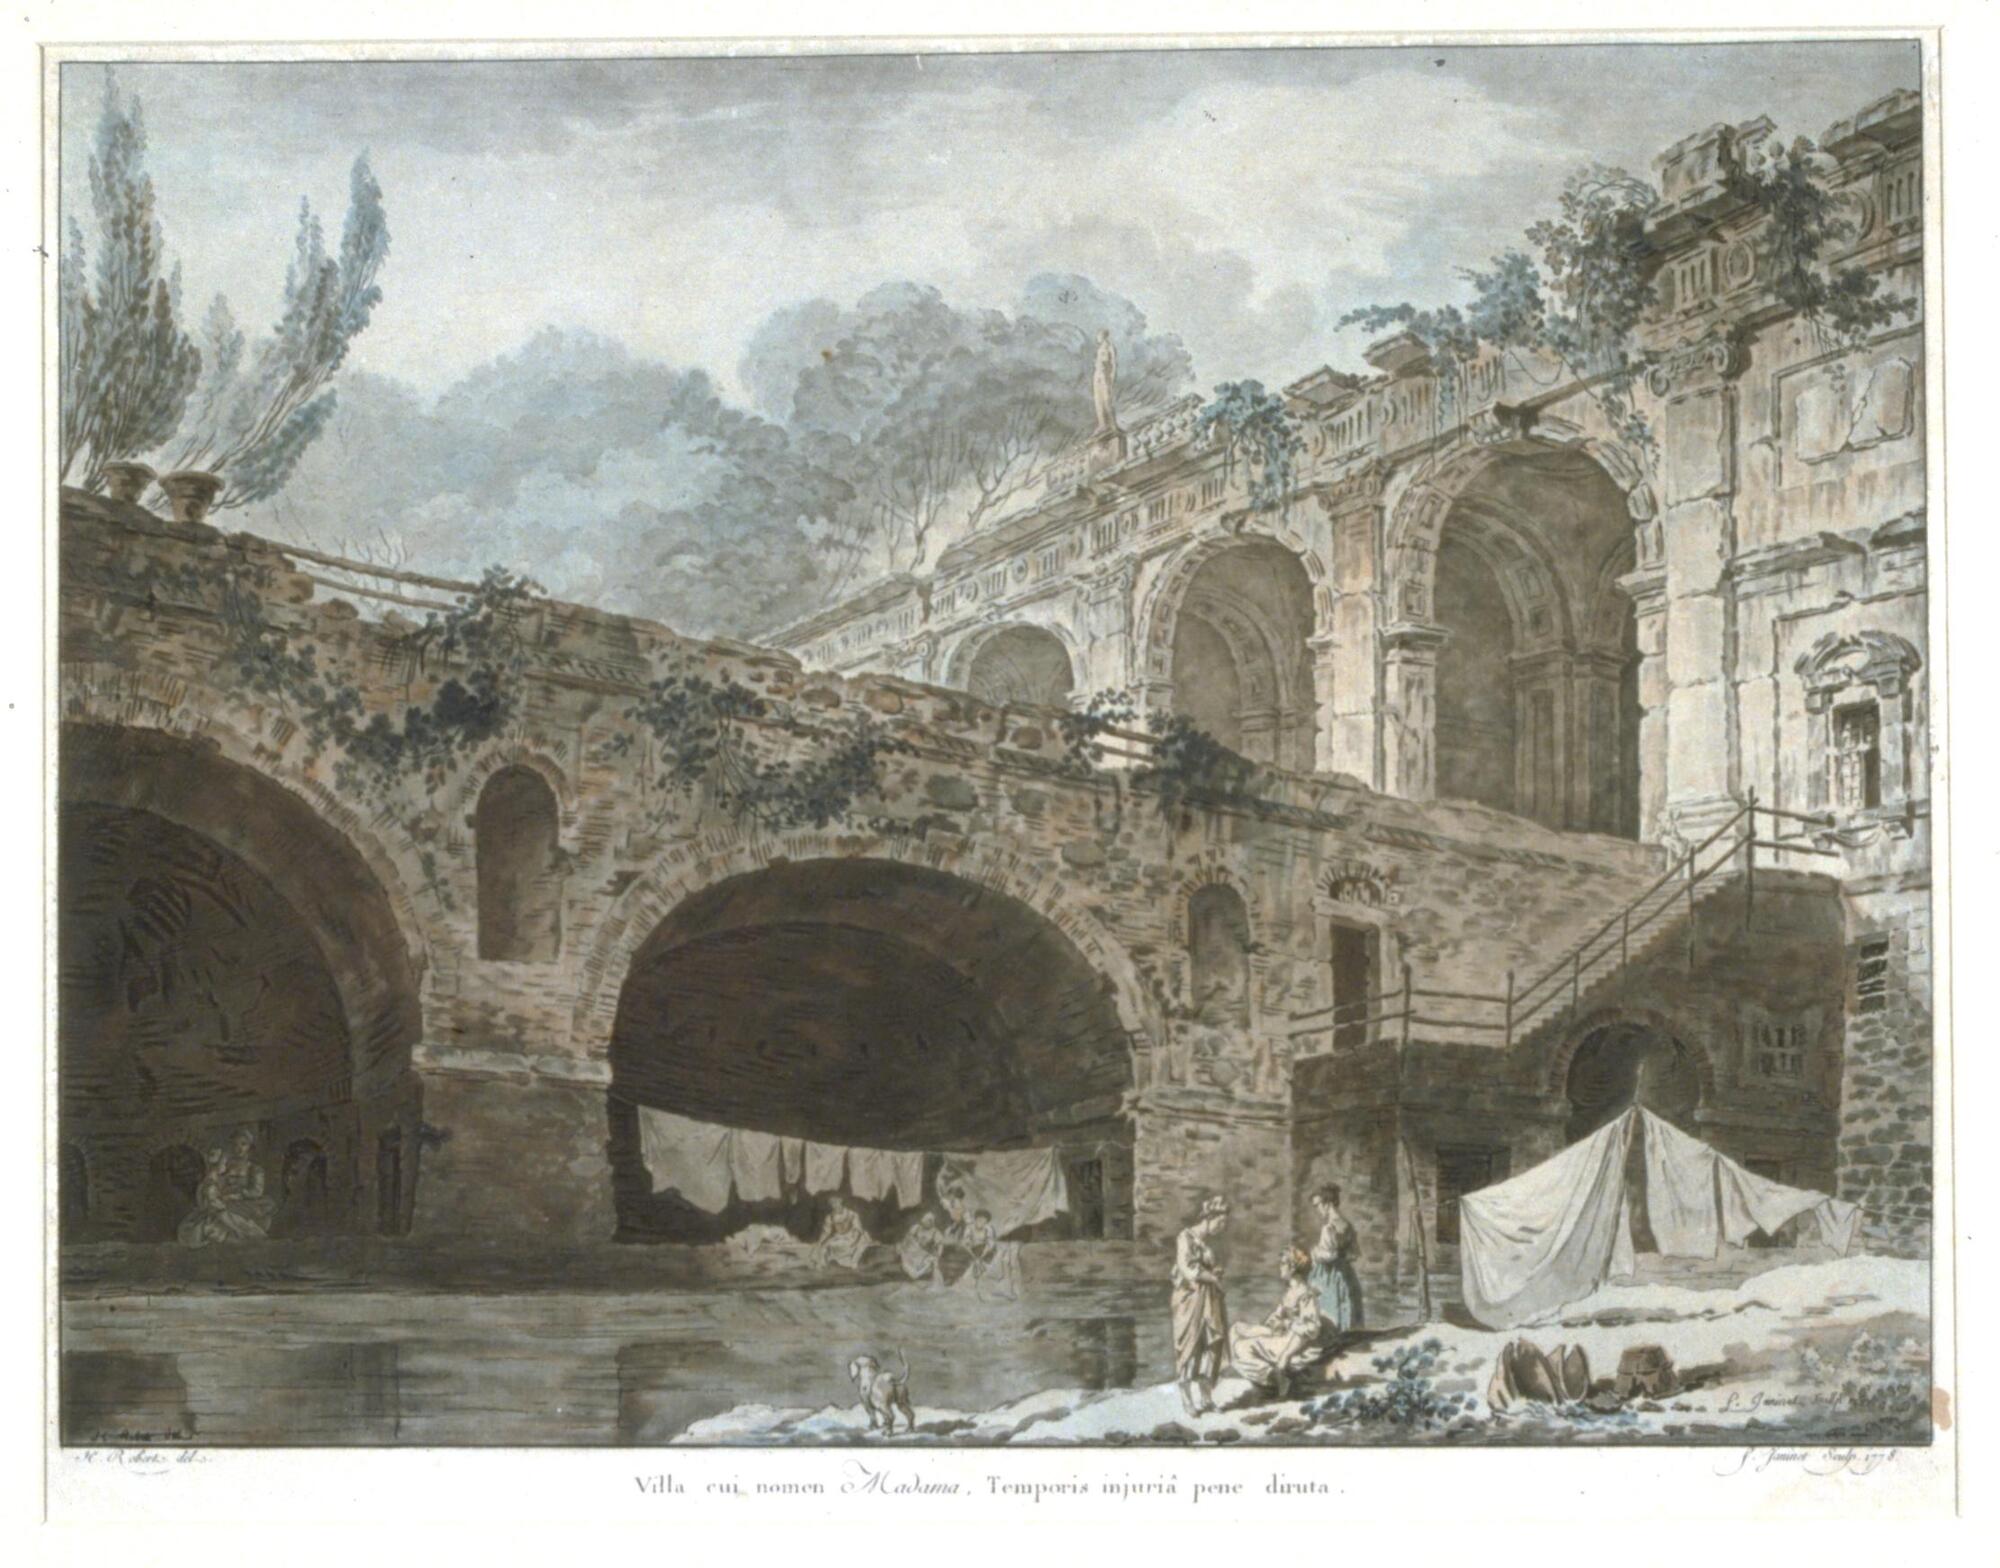 This etching, in a pale blue, brown and gray color scheme, depicts an outdoor scene with a large Roman style building and several human figures in the foreground. One giant wall, with two large arches, with semi-circular apses behind, crosses the middle section of the composition from left to right. It intersects a massive building that has a series of vaulted chambers. Both structures have crumbling stonework and overgrown vegetation. There are several groups of women in the foreground on both sides of a river. Some are in the water washing laundry and some are standing with wash hanging on lines. There is a small dog on the shore.